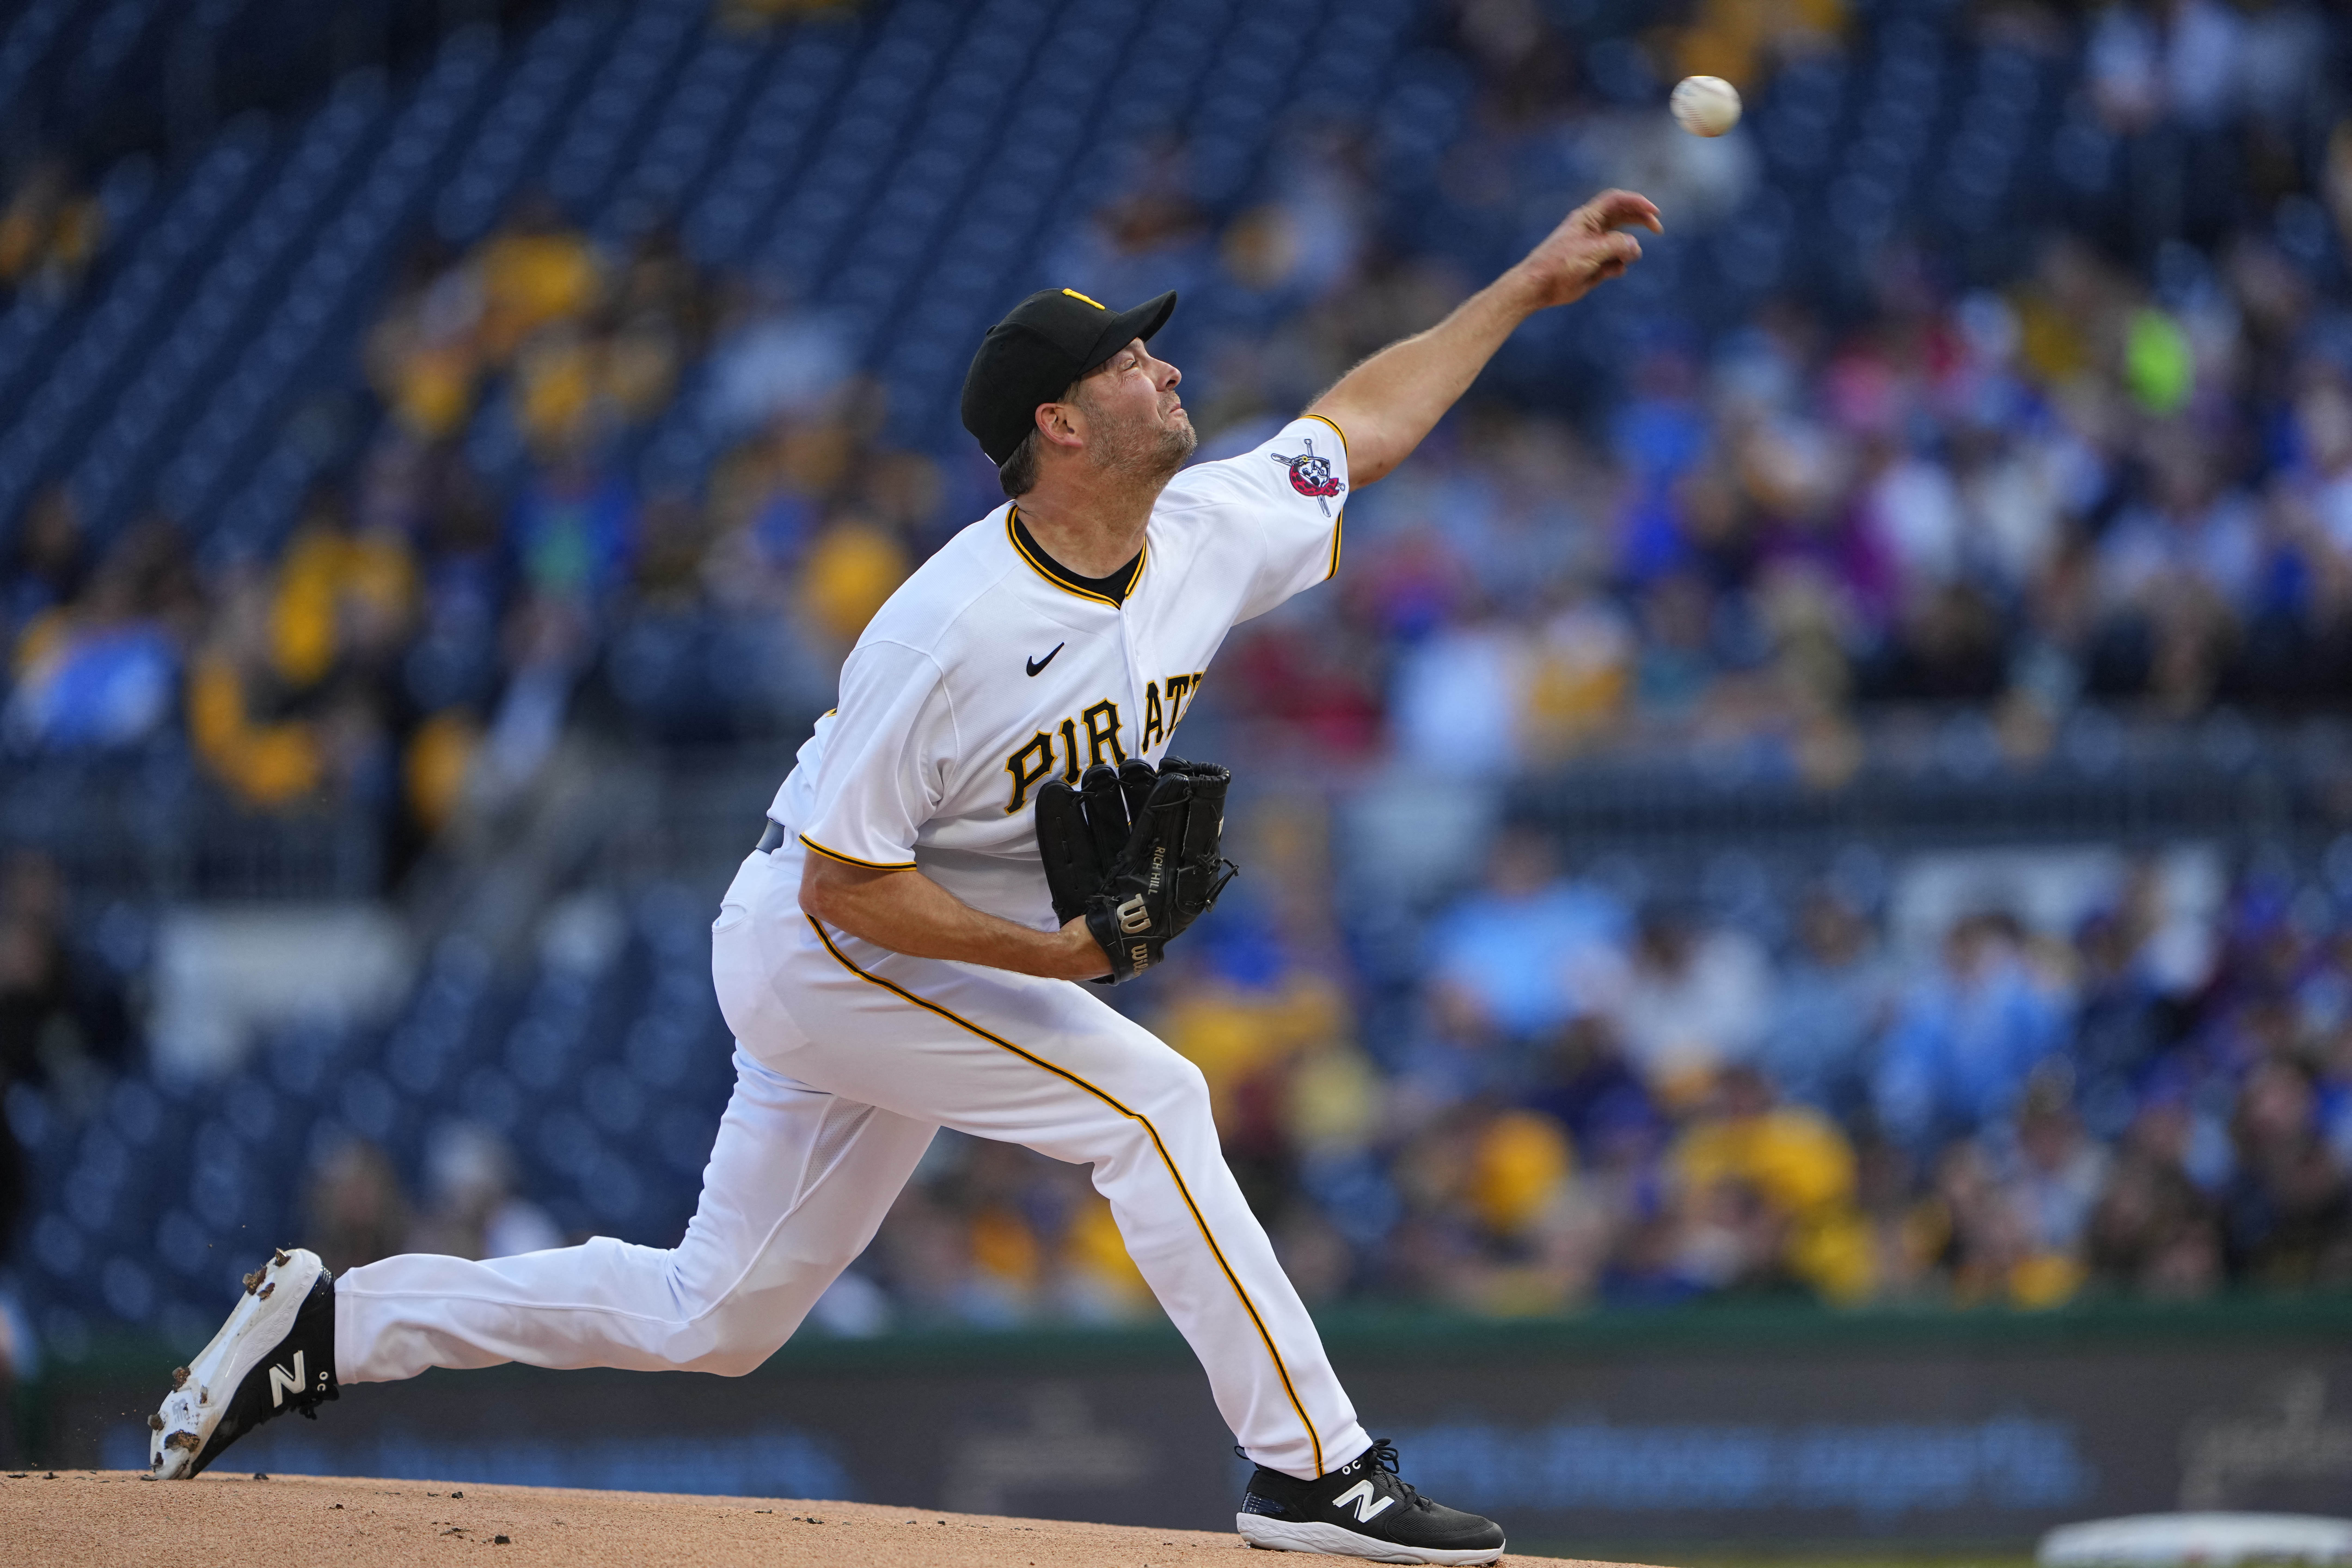 Offense continues to sputter, Pirates come up short against Blue Jays